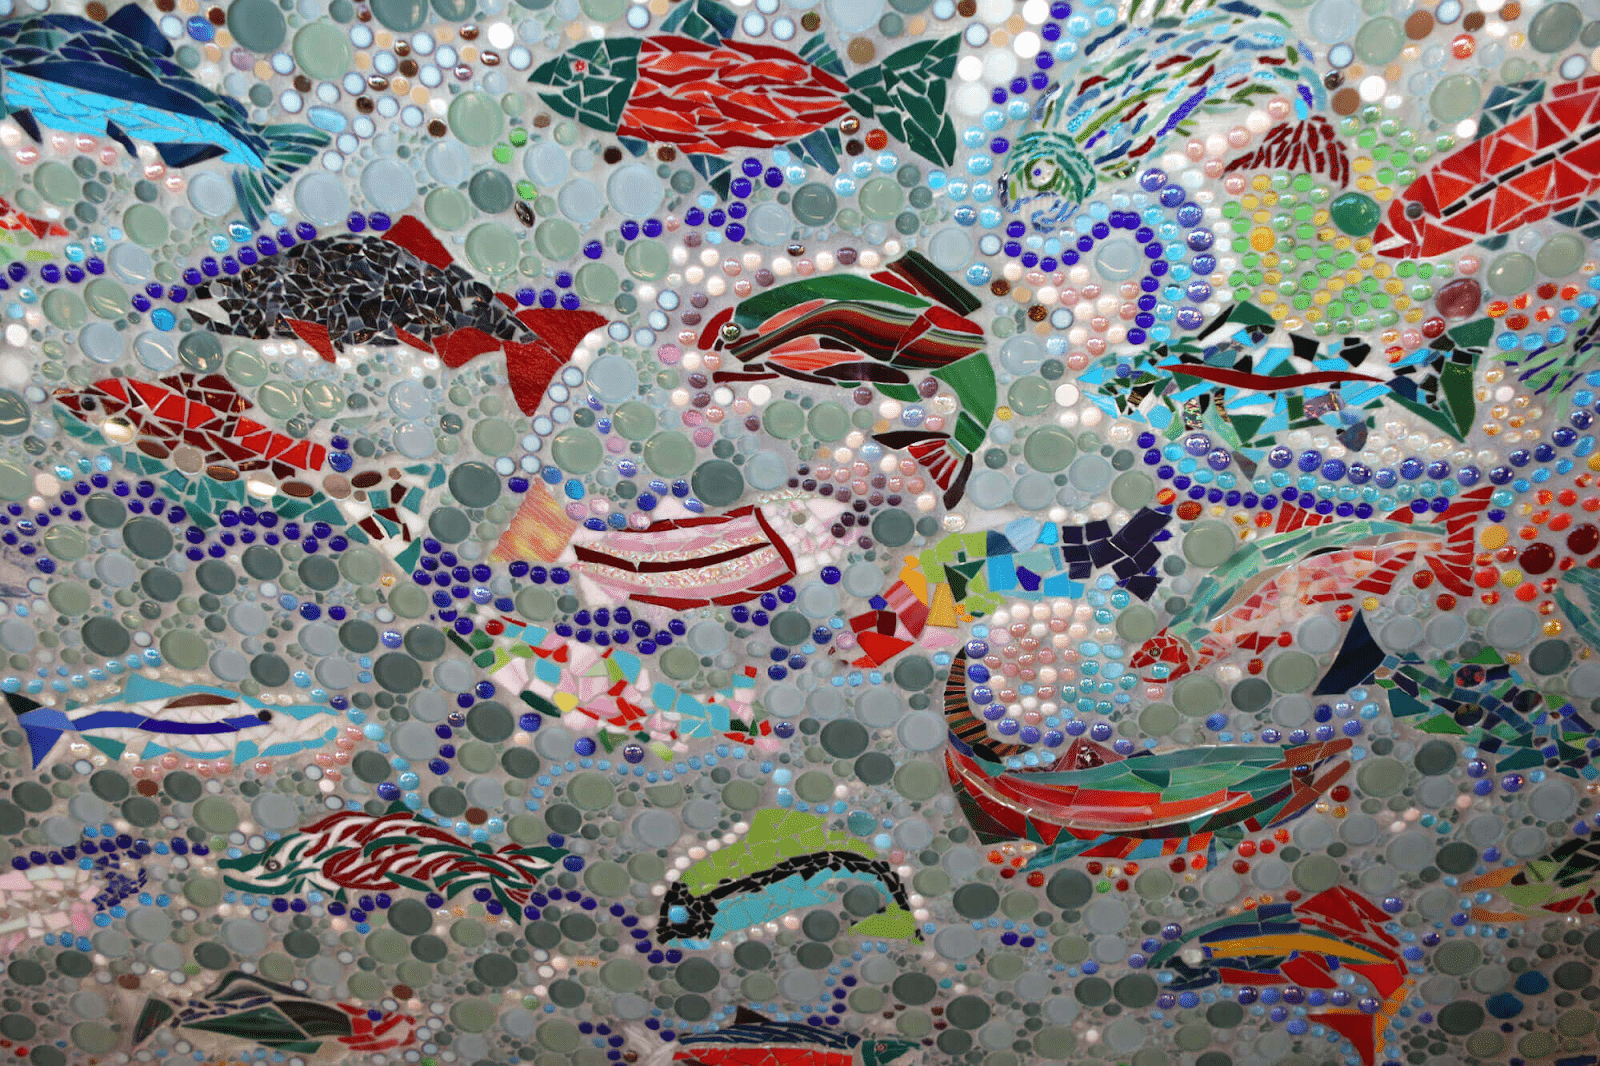 Mosaic tile mural with salmon imagery